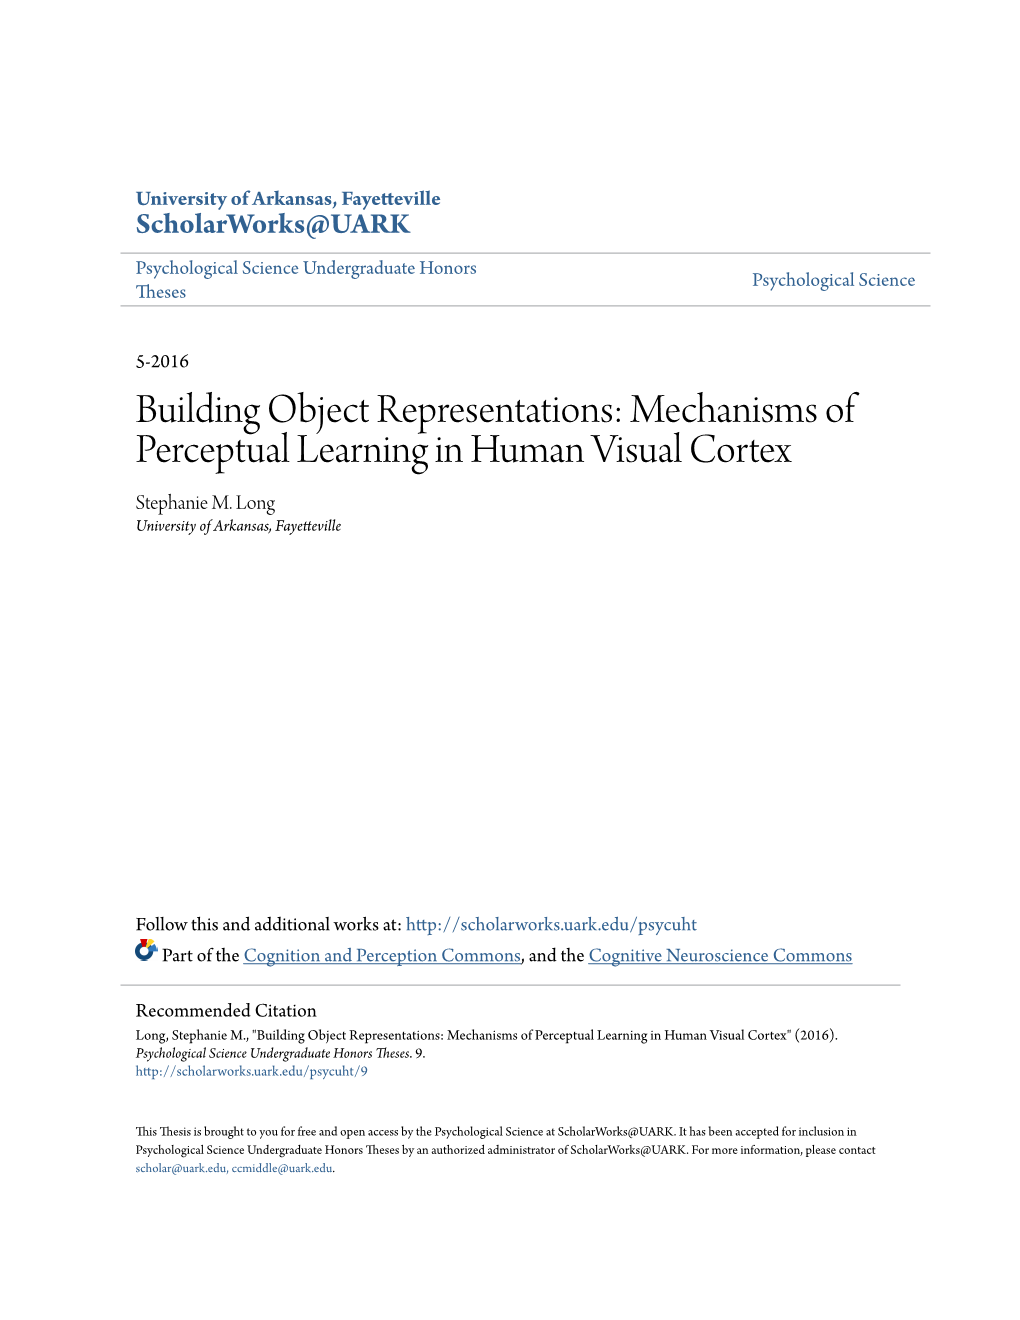 Building Object Representations: Mechanisms of Perceptual Learning in Human Visual Cortex Stephanie M